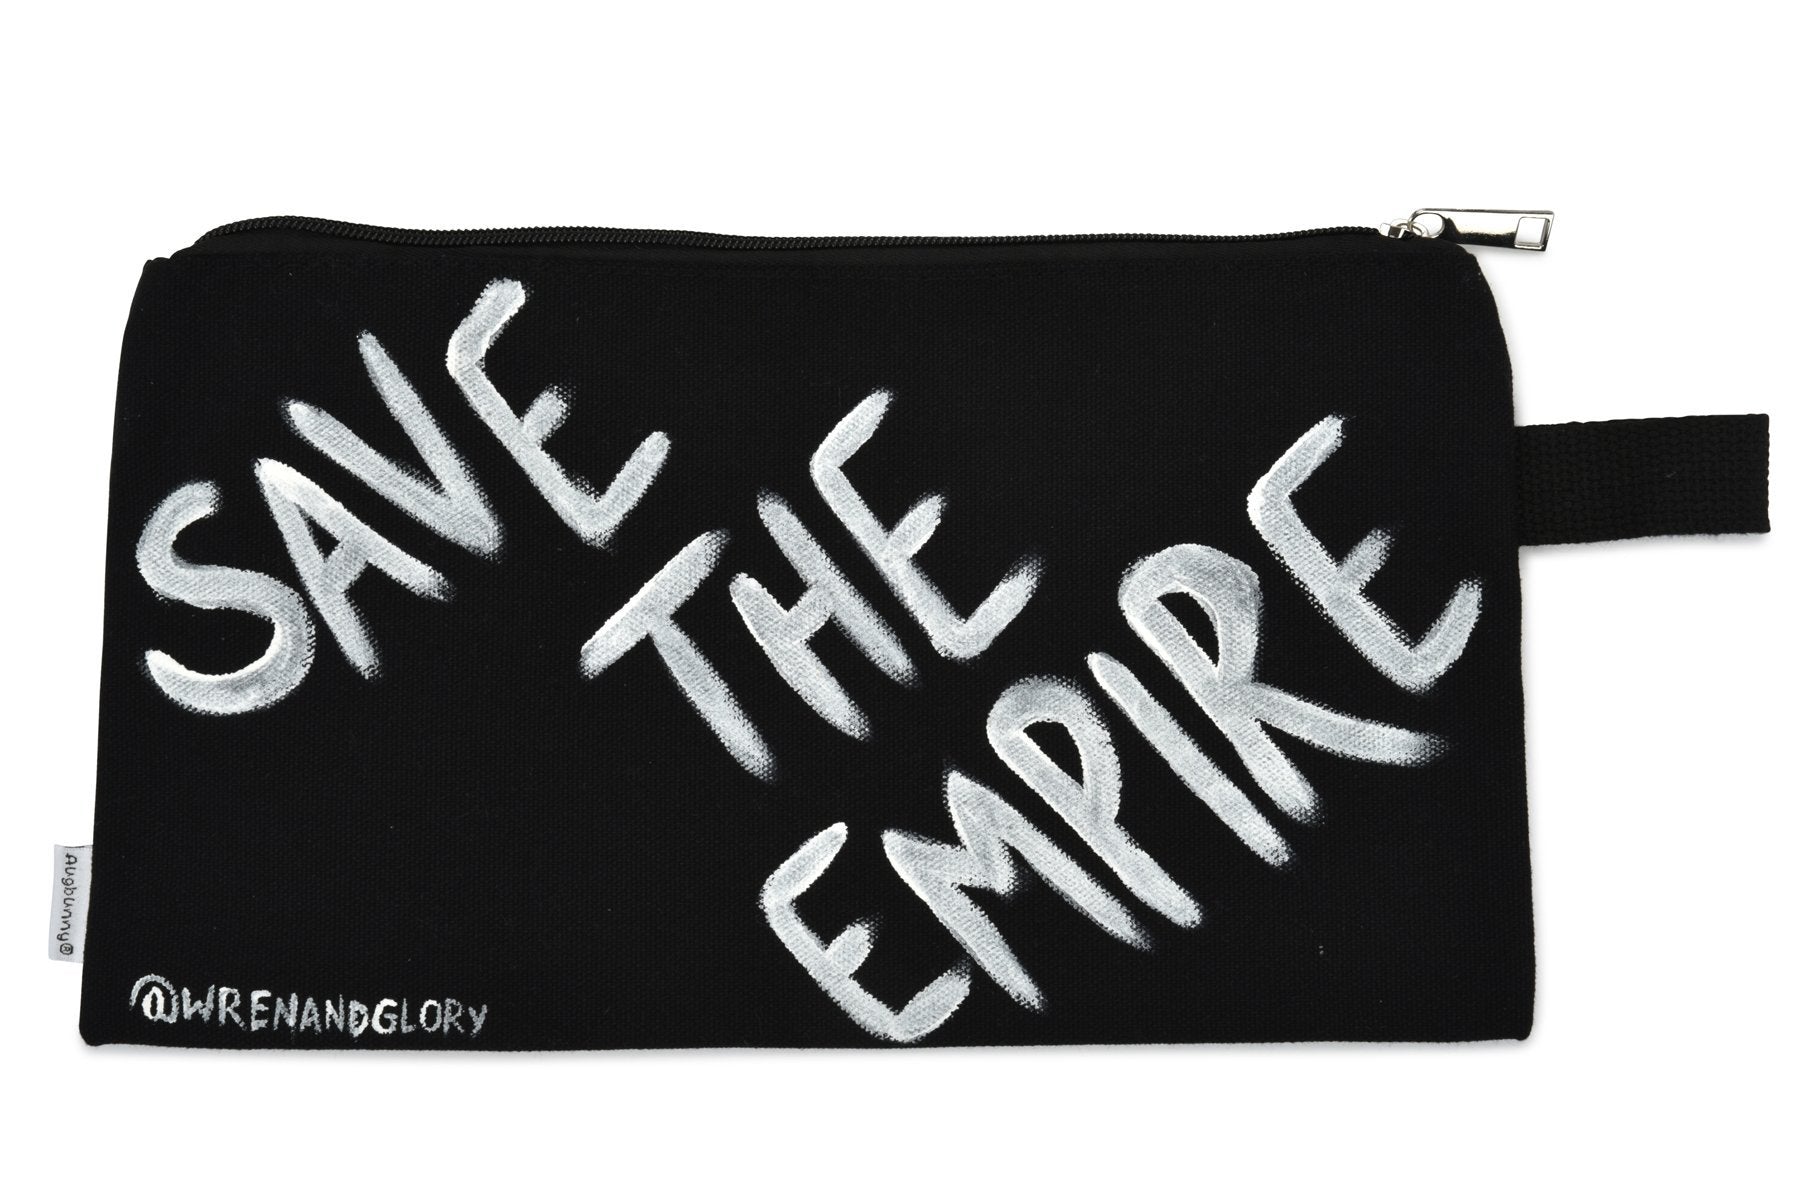 Black denim zippered pouch Hand painted 'Damn The Man' on one side, 'Save The Empire' on the other side.